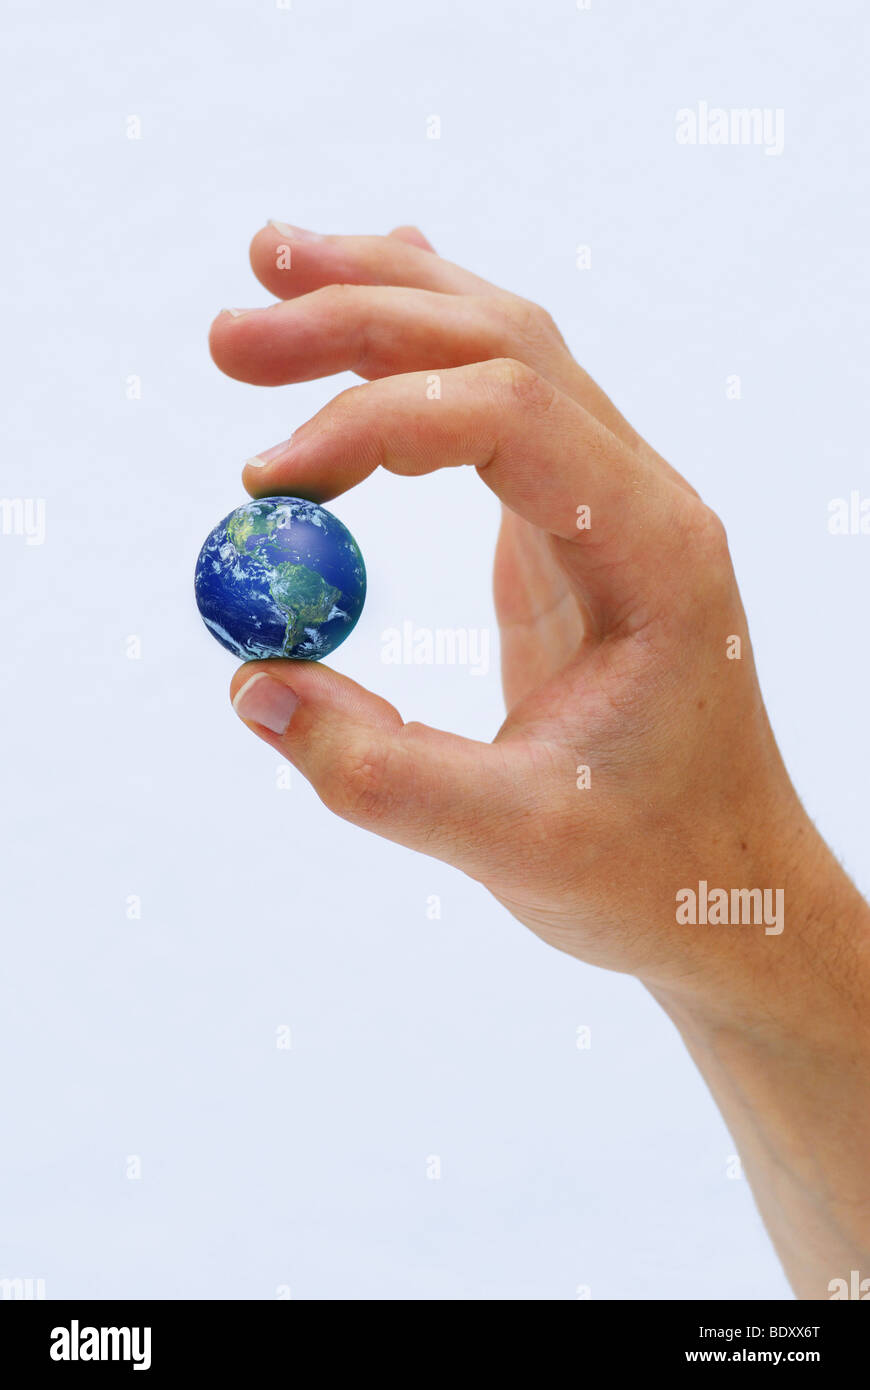 Hand holding the Earth between fingers Stock Photo